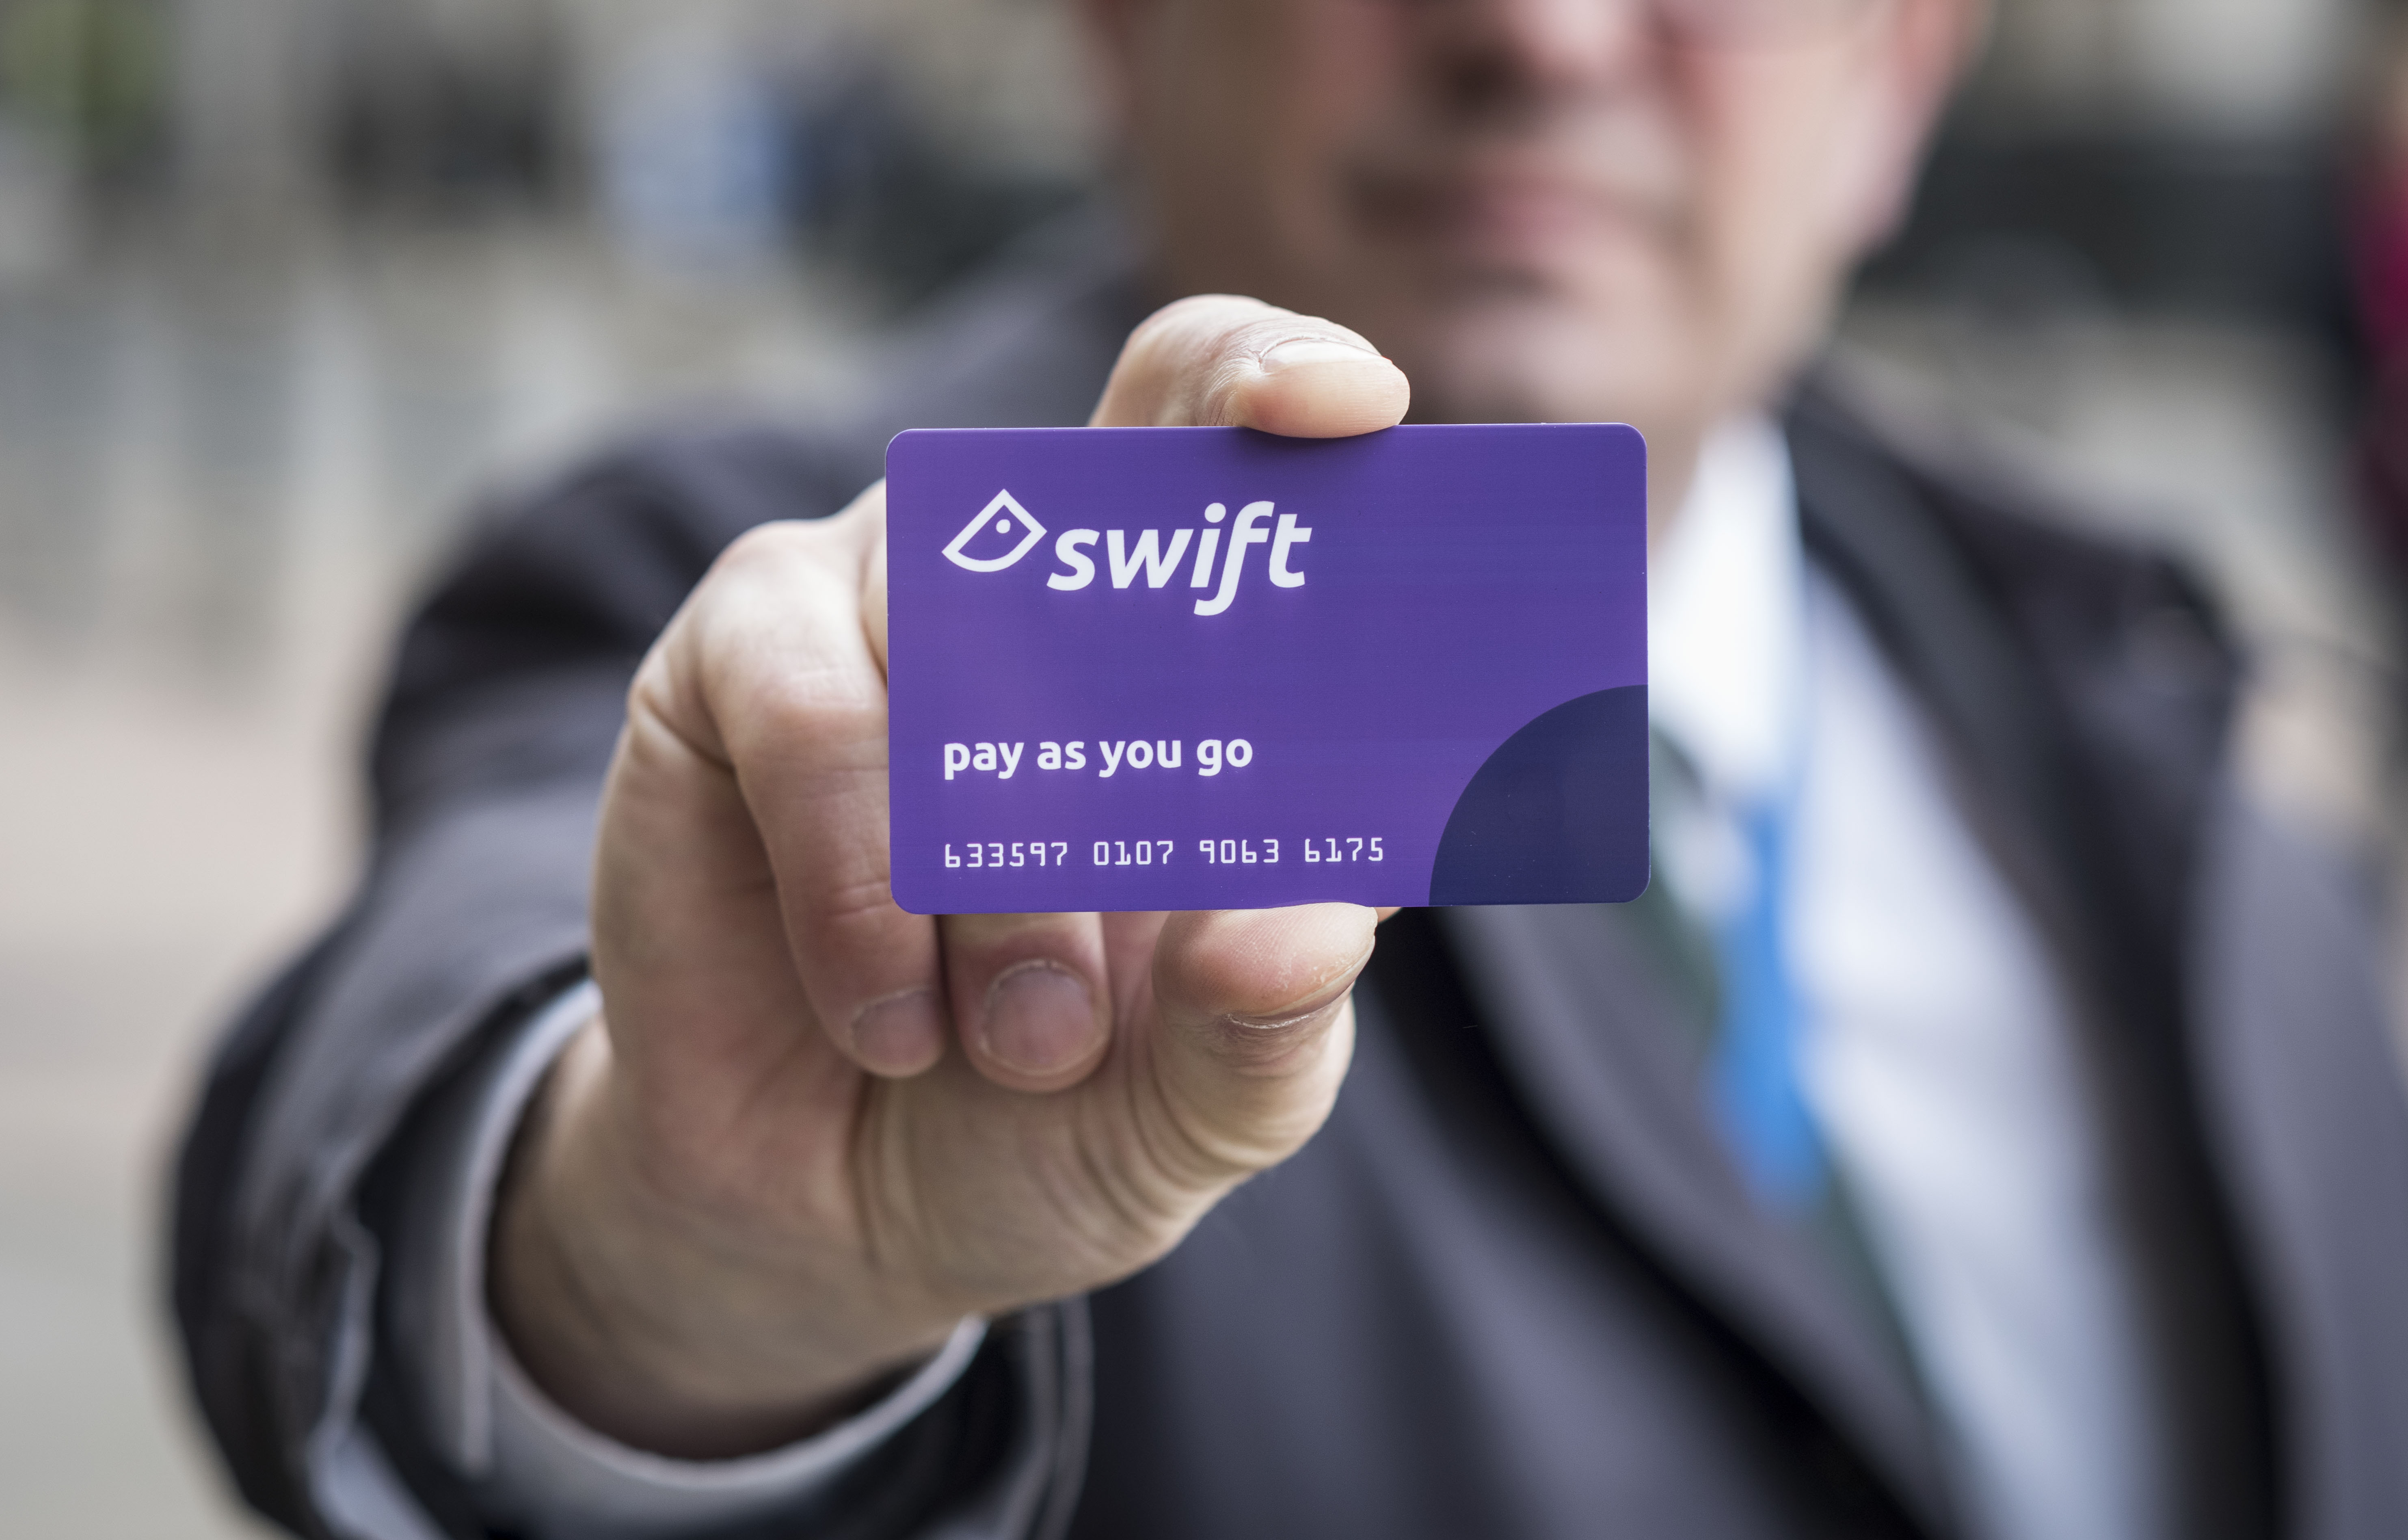 Swift cards could be used to pay for gym membership under new Future Mobility plans